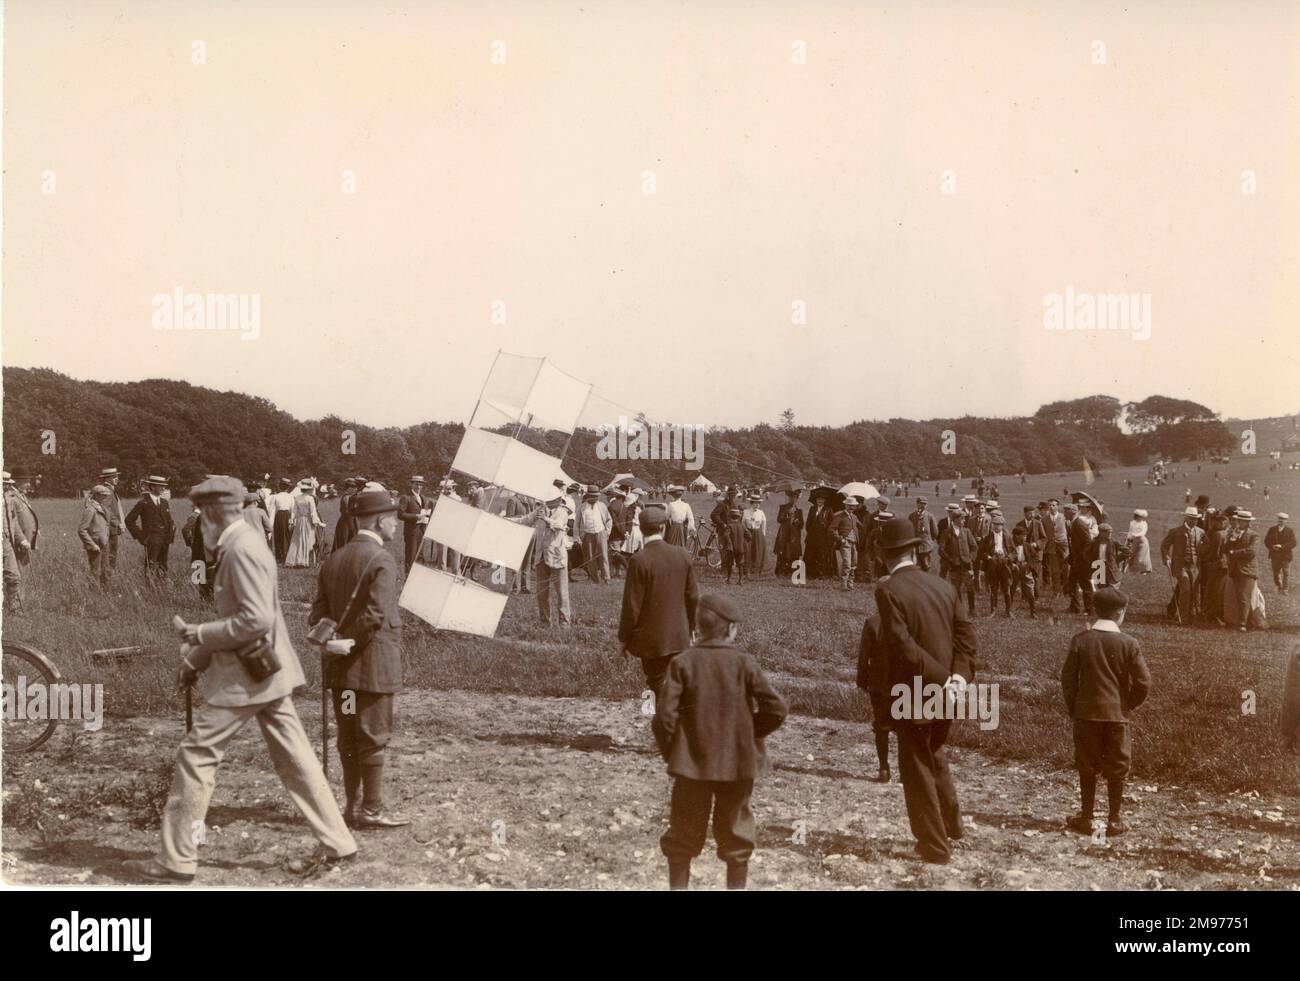 S.H.R. Salmon’s multiple celled rhomboidal kite at the Findon International Kite Competition on the Sussex Downs, 25 June 1903. Stock Photo